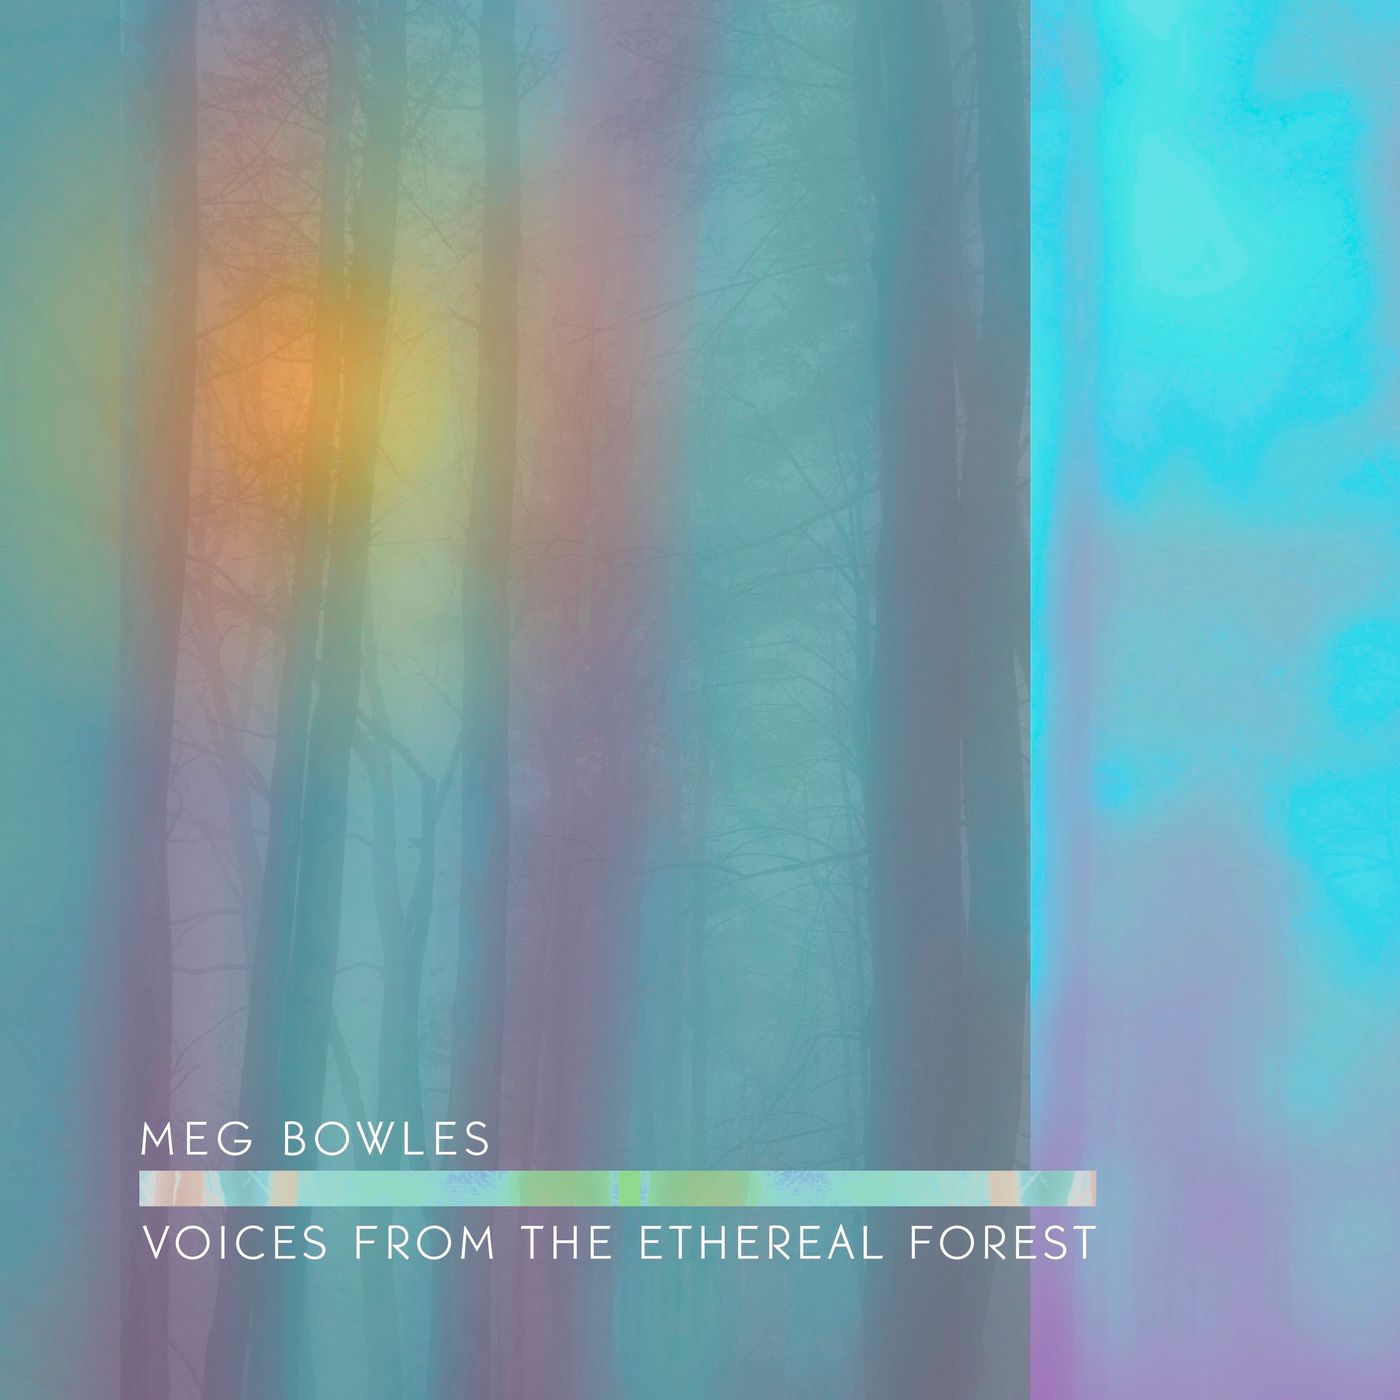 MEG BOWLES ~ The Voice from The Ethereal Forest